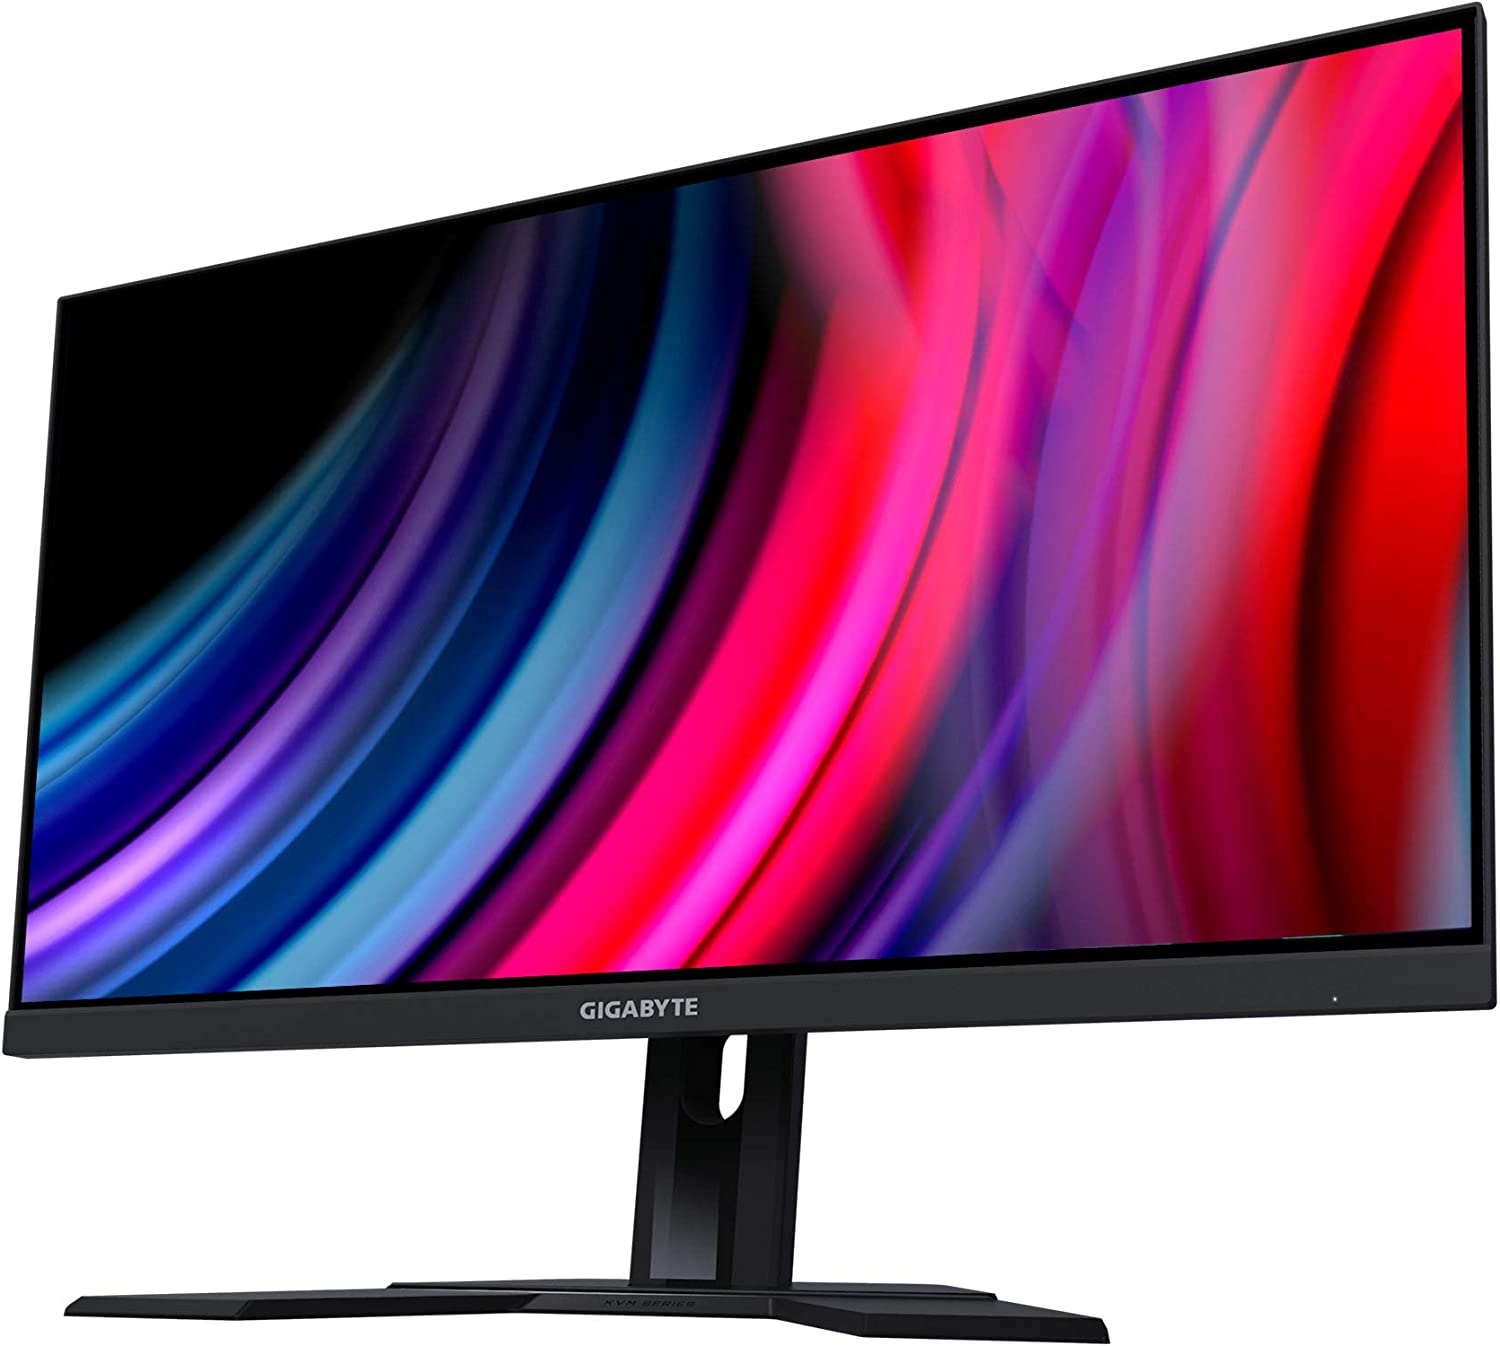 Press image of the Gigabyte M27Q gaming monitor on a white background.